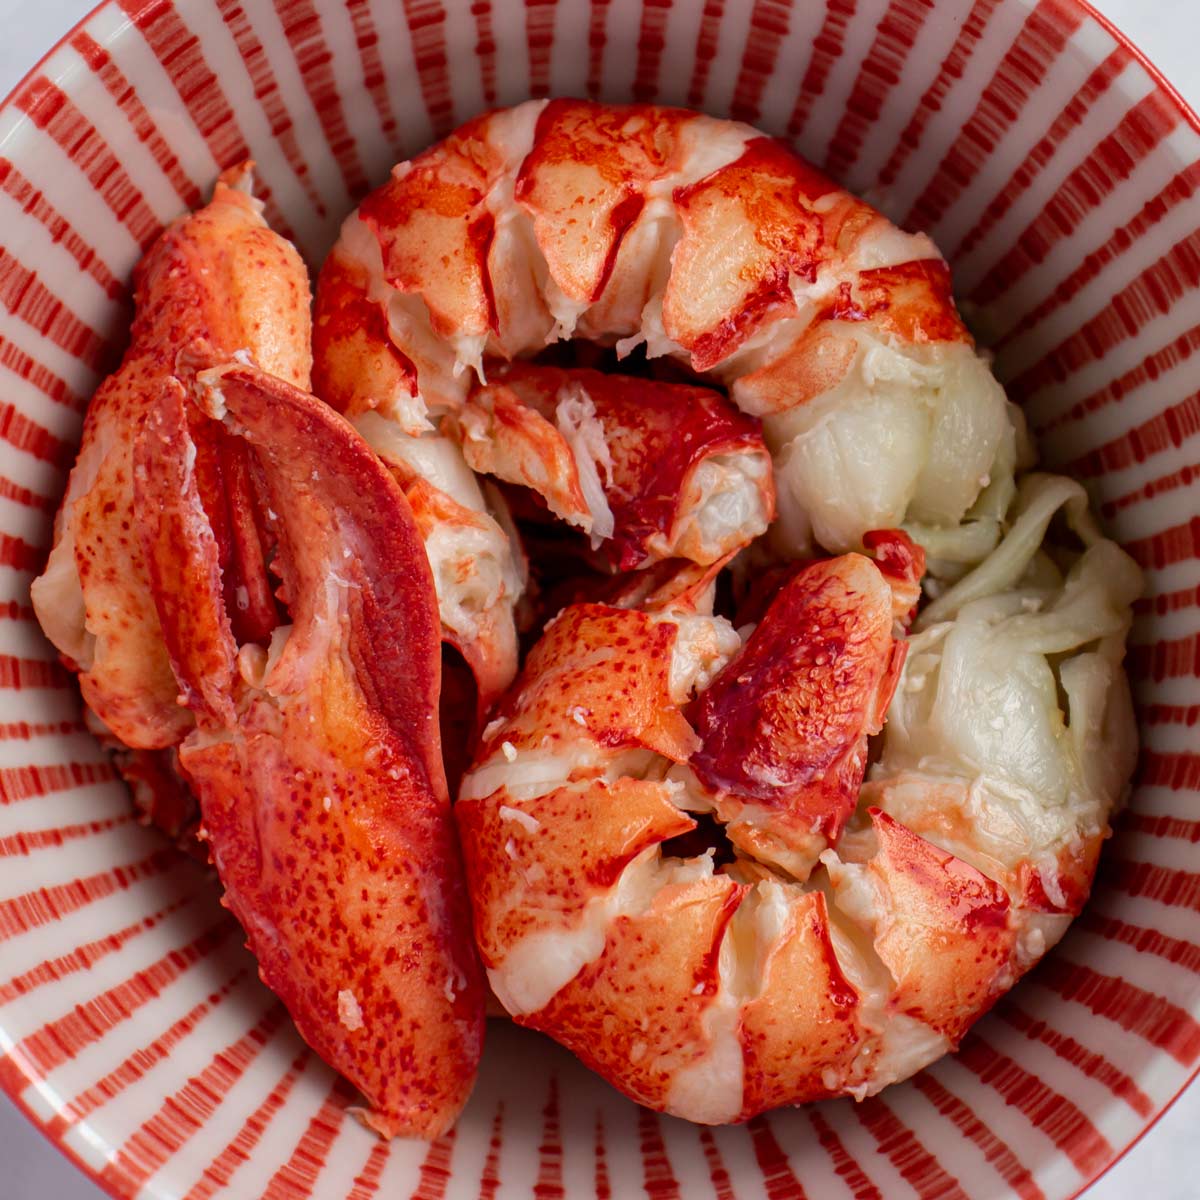 Closeup of lobster meat in a red and white bowl.